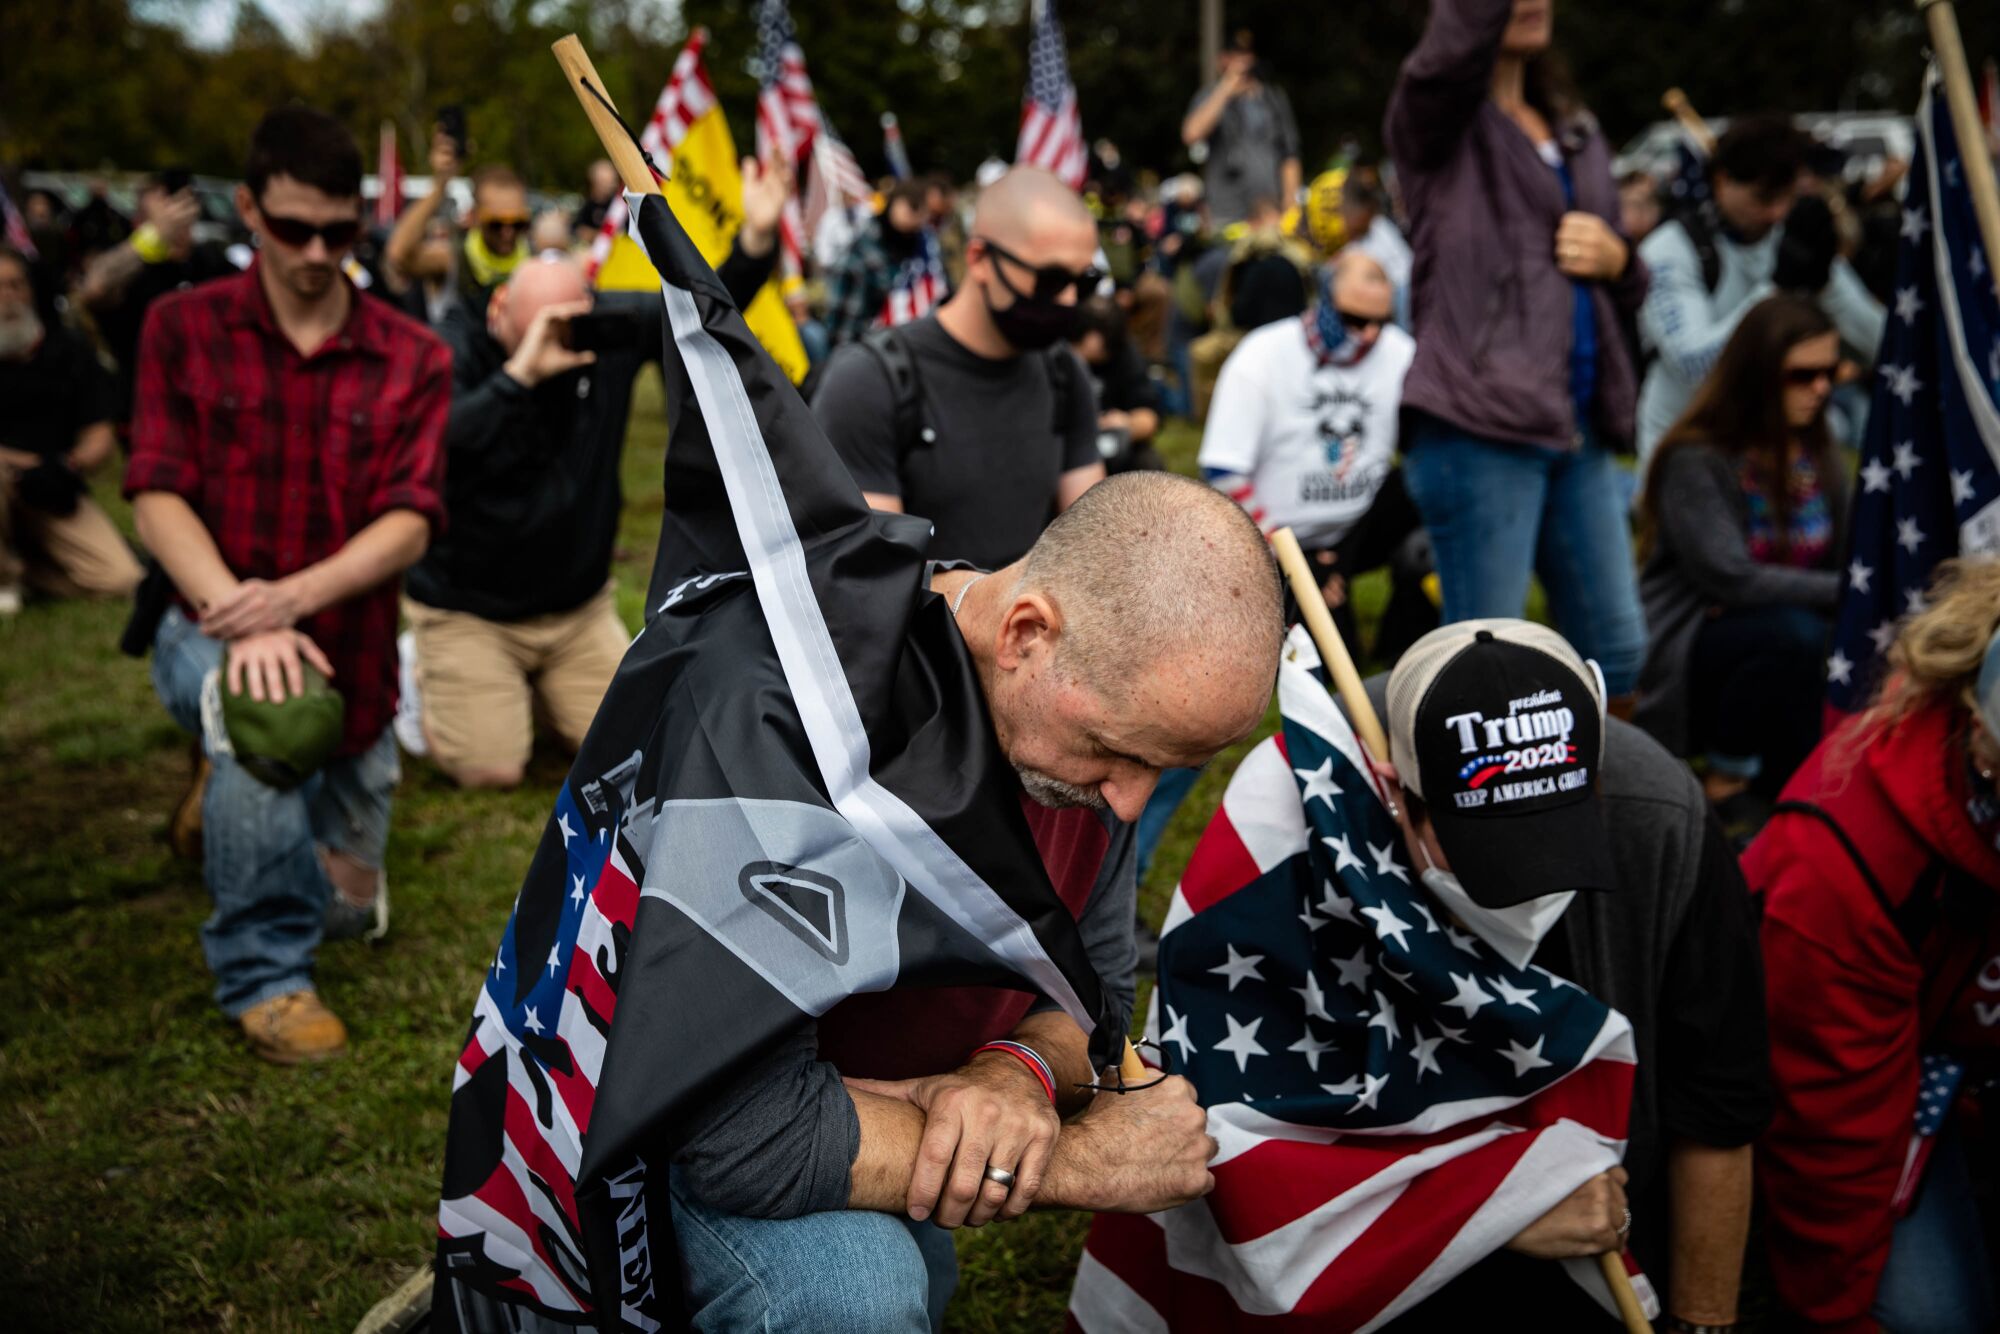 People with U.S. flags and Trump 2020 hats kneel in a park